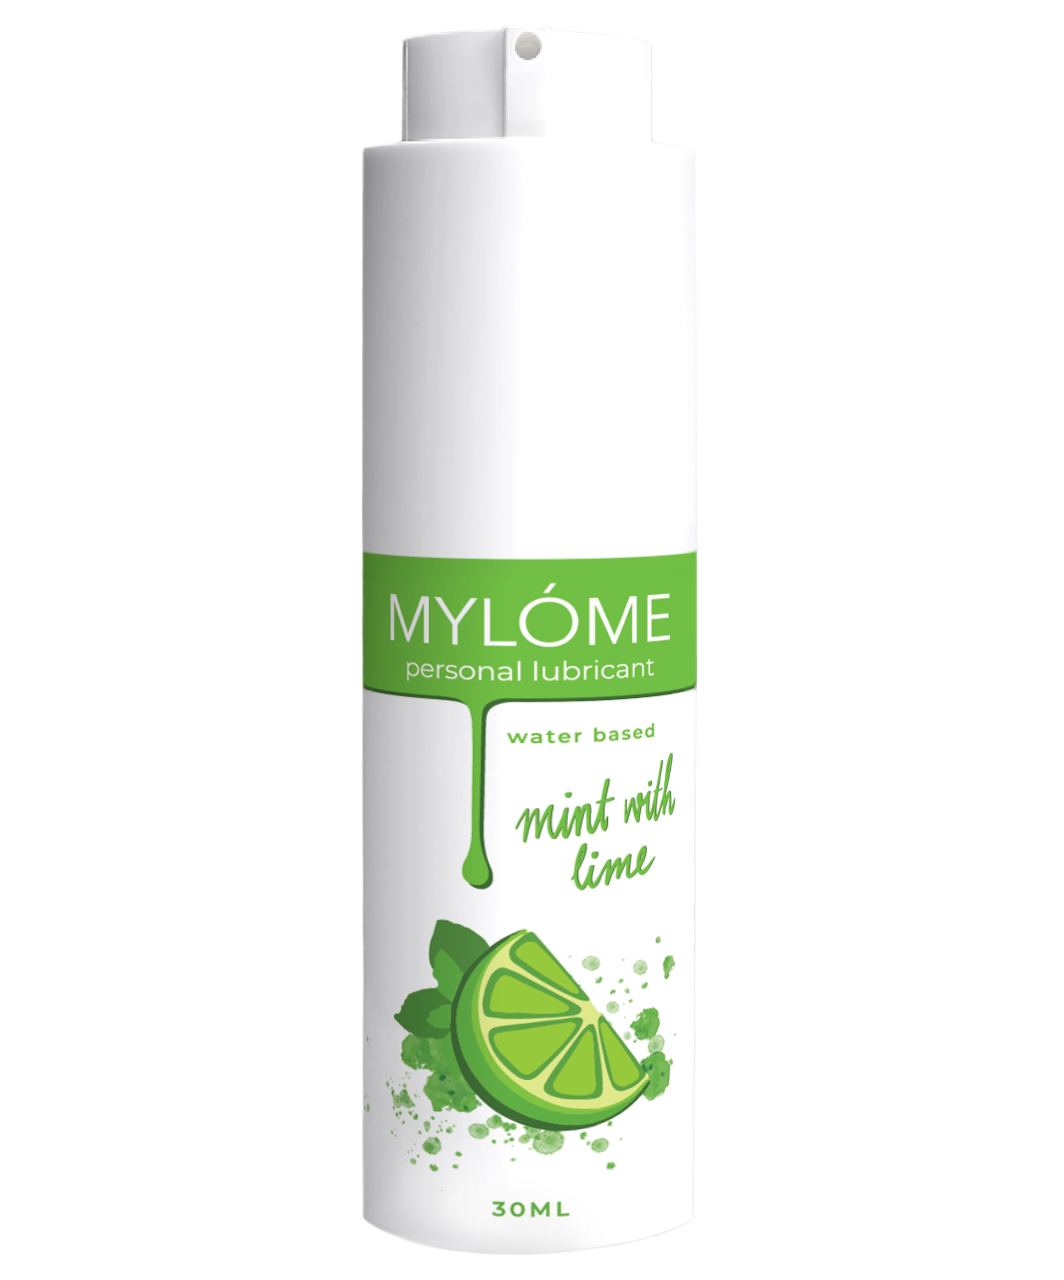 MYLOME flavoured lubricant (30 ml)